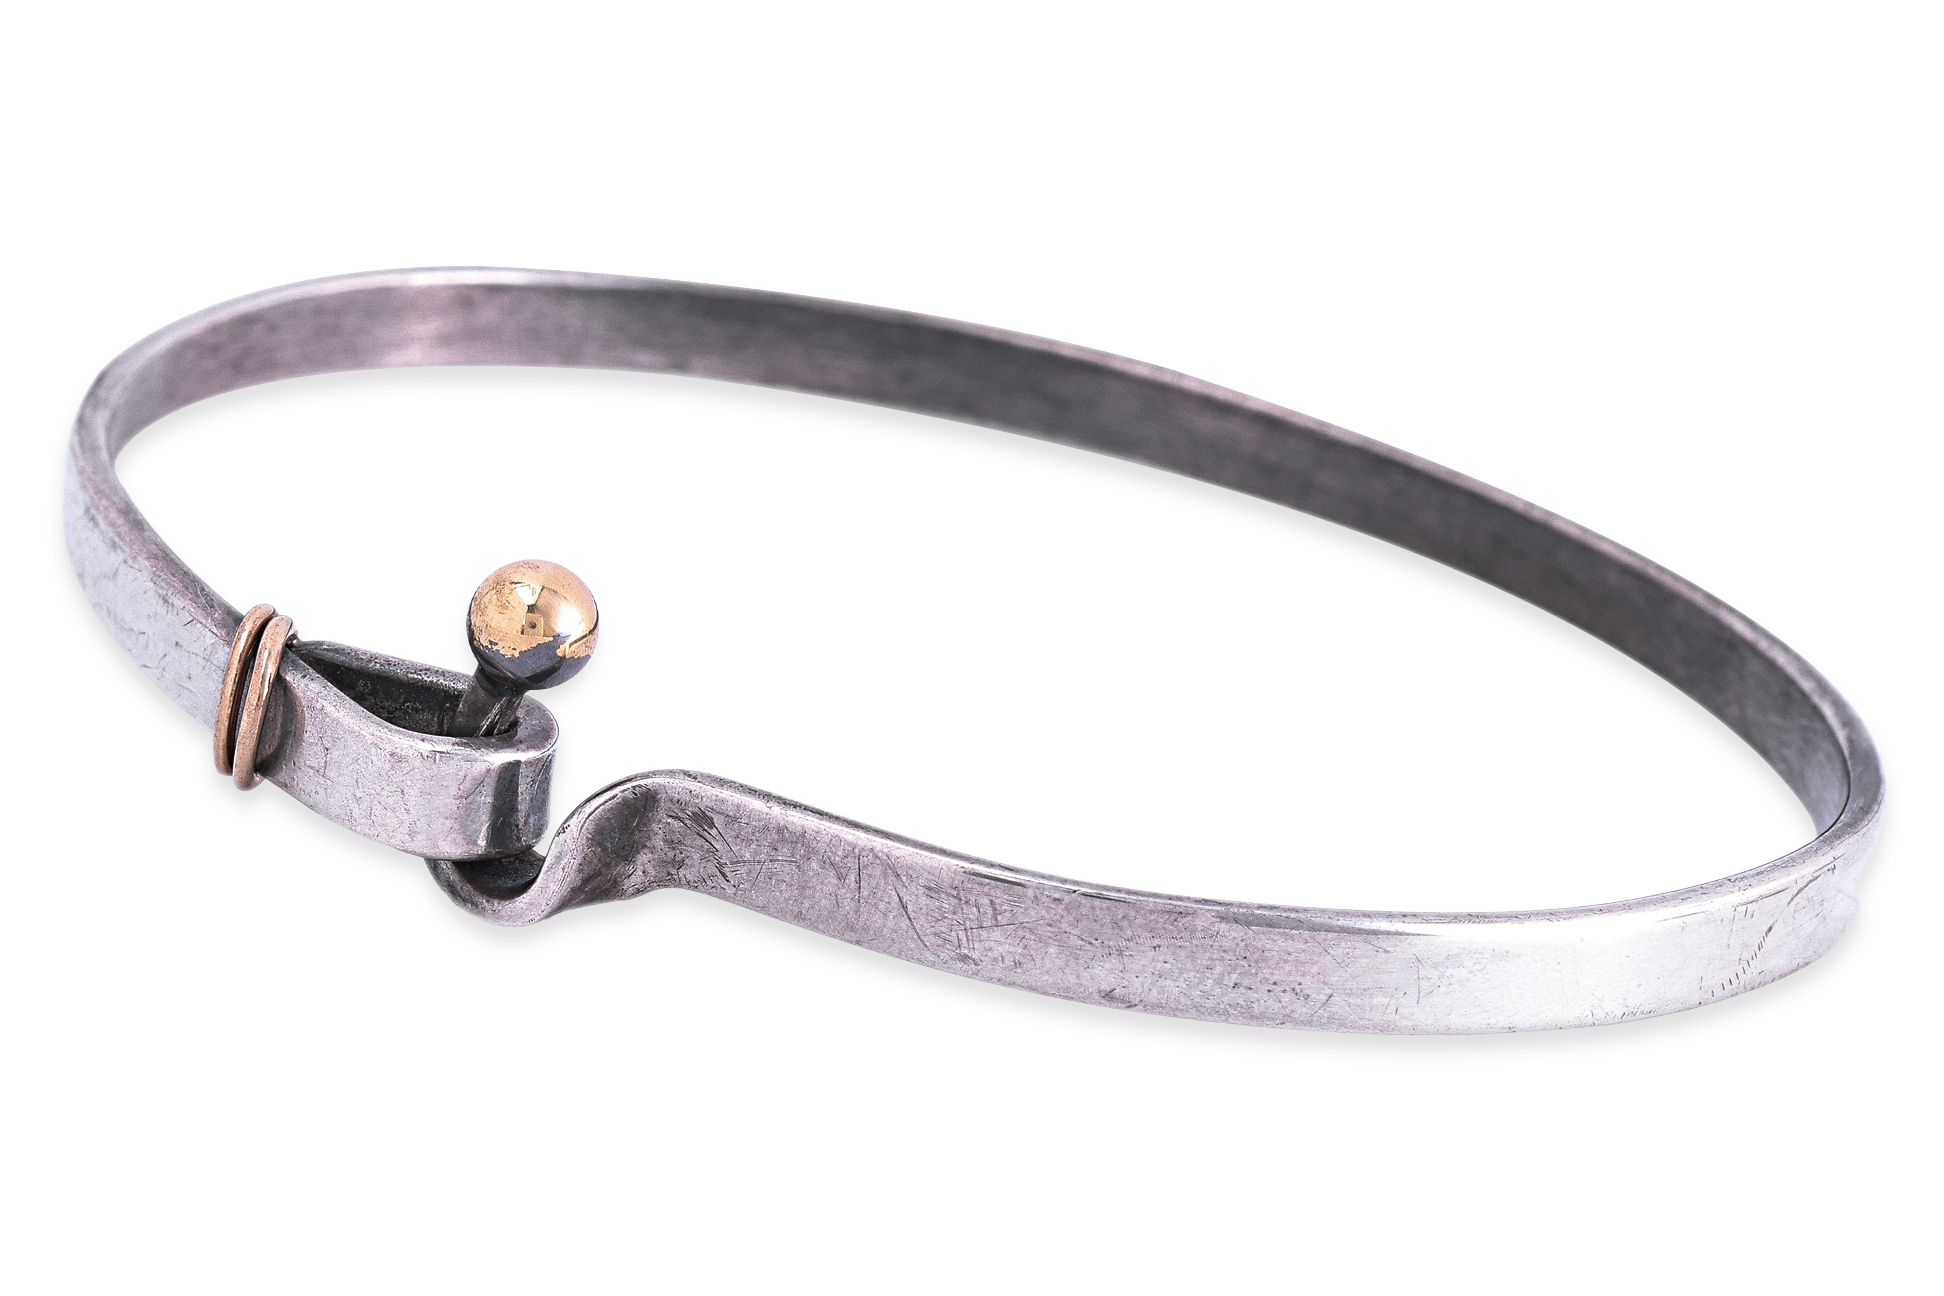 A TIFFANY & CO. SILVER AND GOLD HOOK AND EYE BANGLE BRACELET